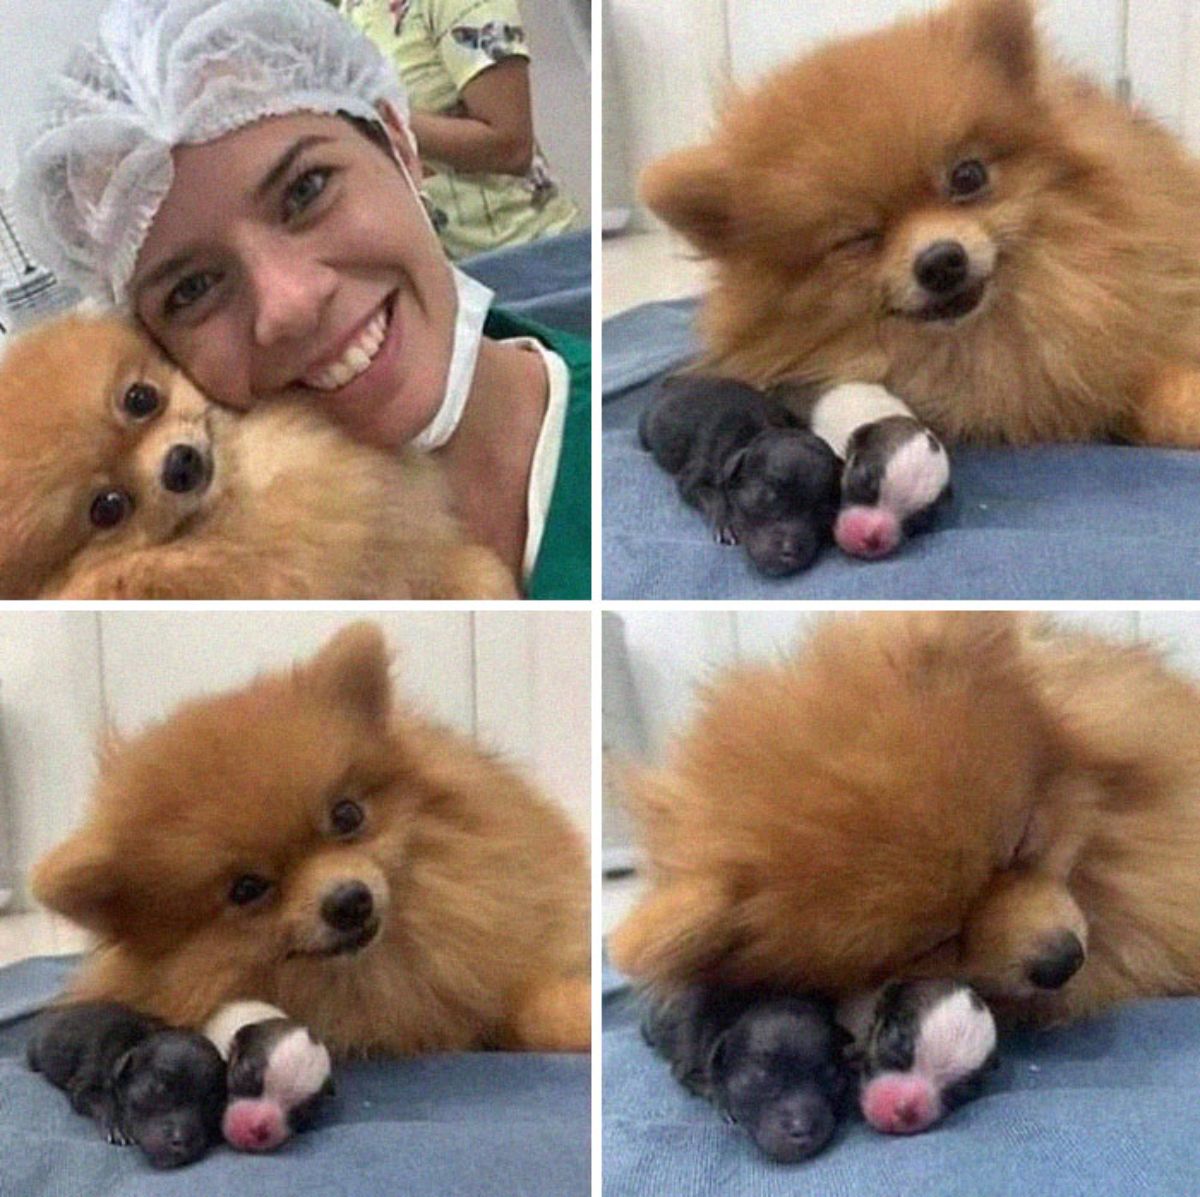 1 photo of a brown pomeranian with a vet and 3 photos of the same dog with 1 black and 1 black and white newborn puppies on a blue blanket